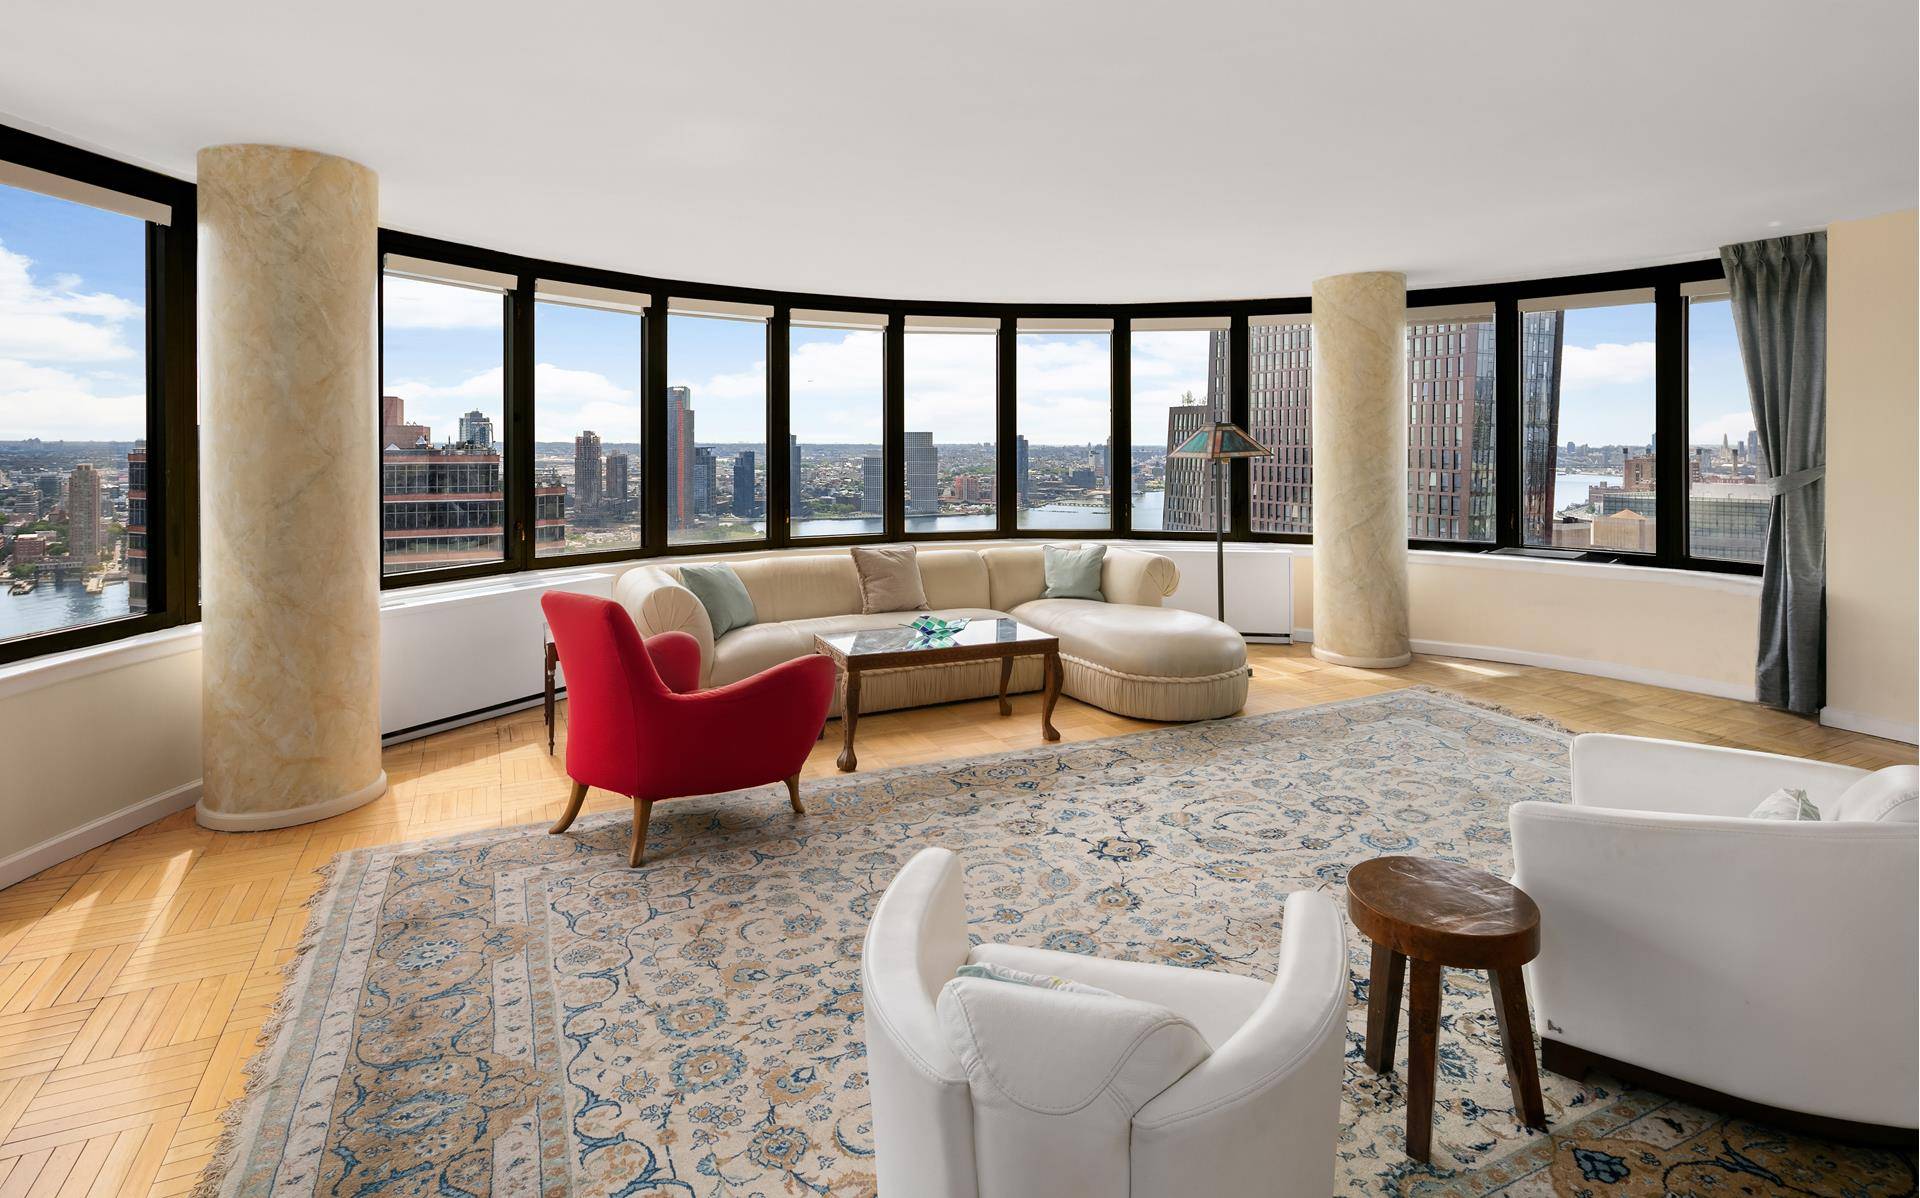 Behold spectacular views from every room of this high floor condominium at the Corinthian.